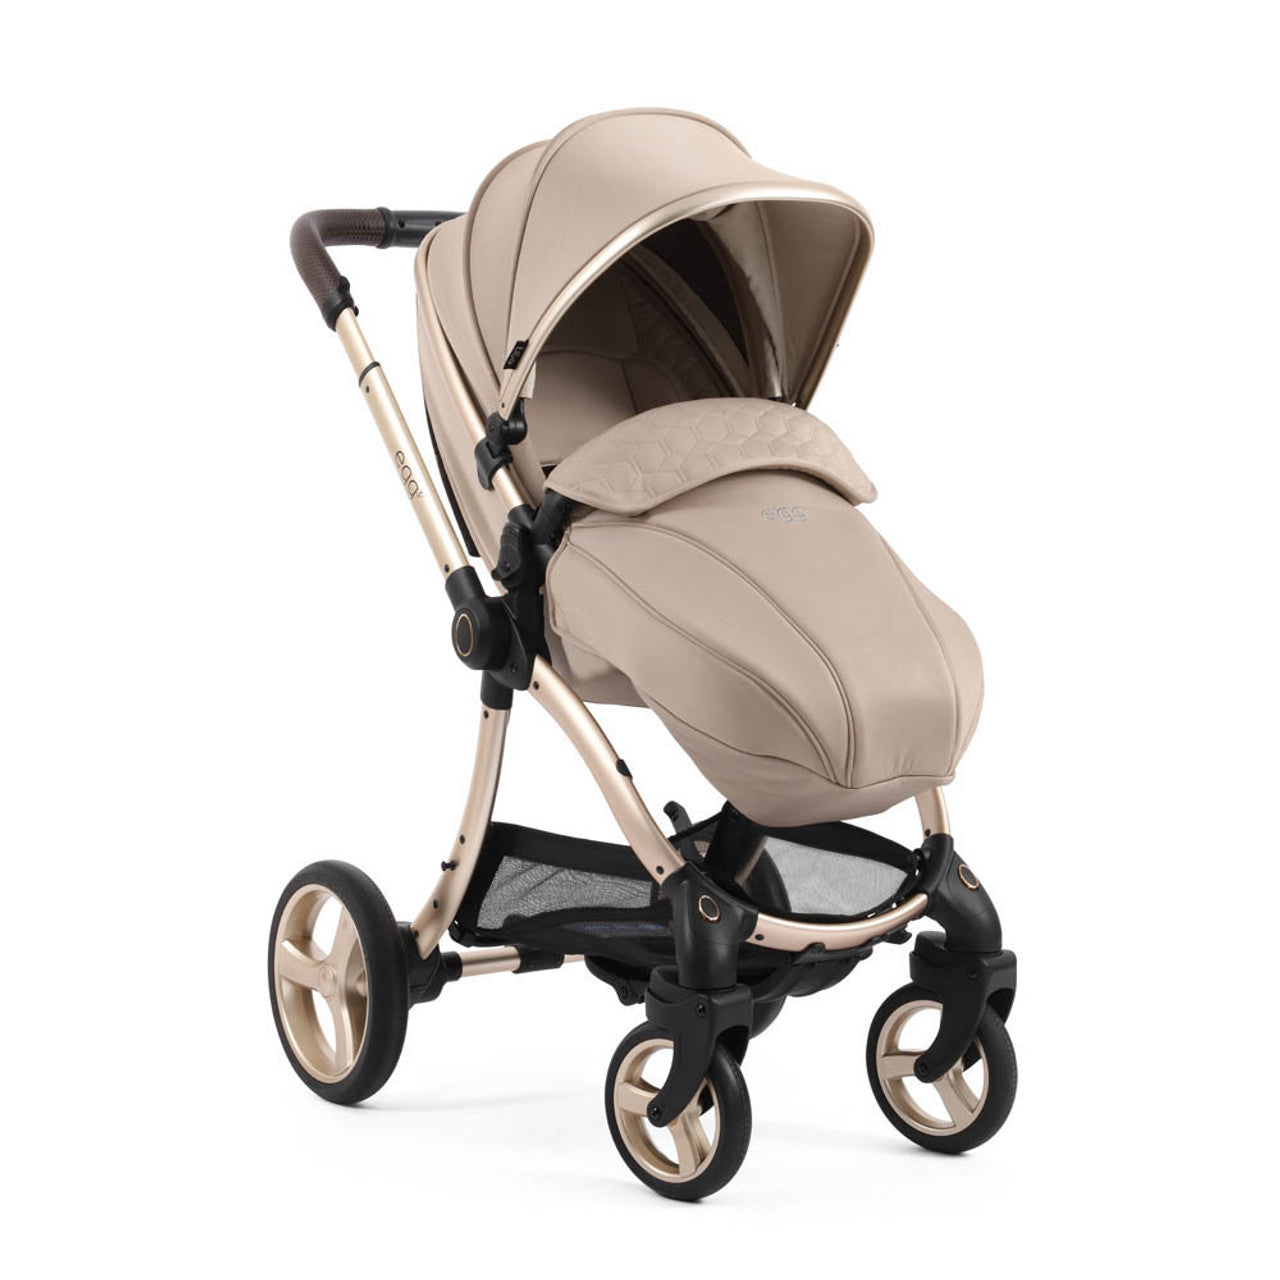 Egg® 3 Pushchair + Carrycot 2 in 1 Pram - Feather -  | For Your Little One